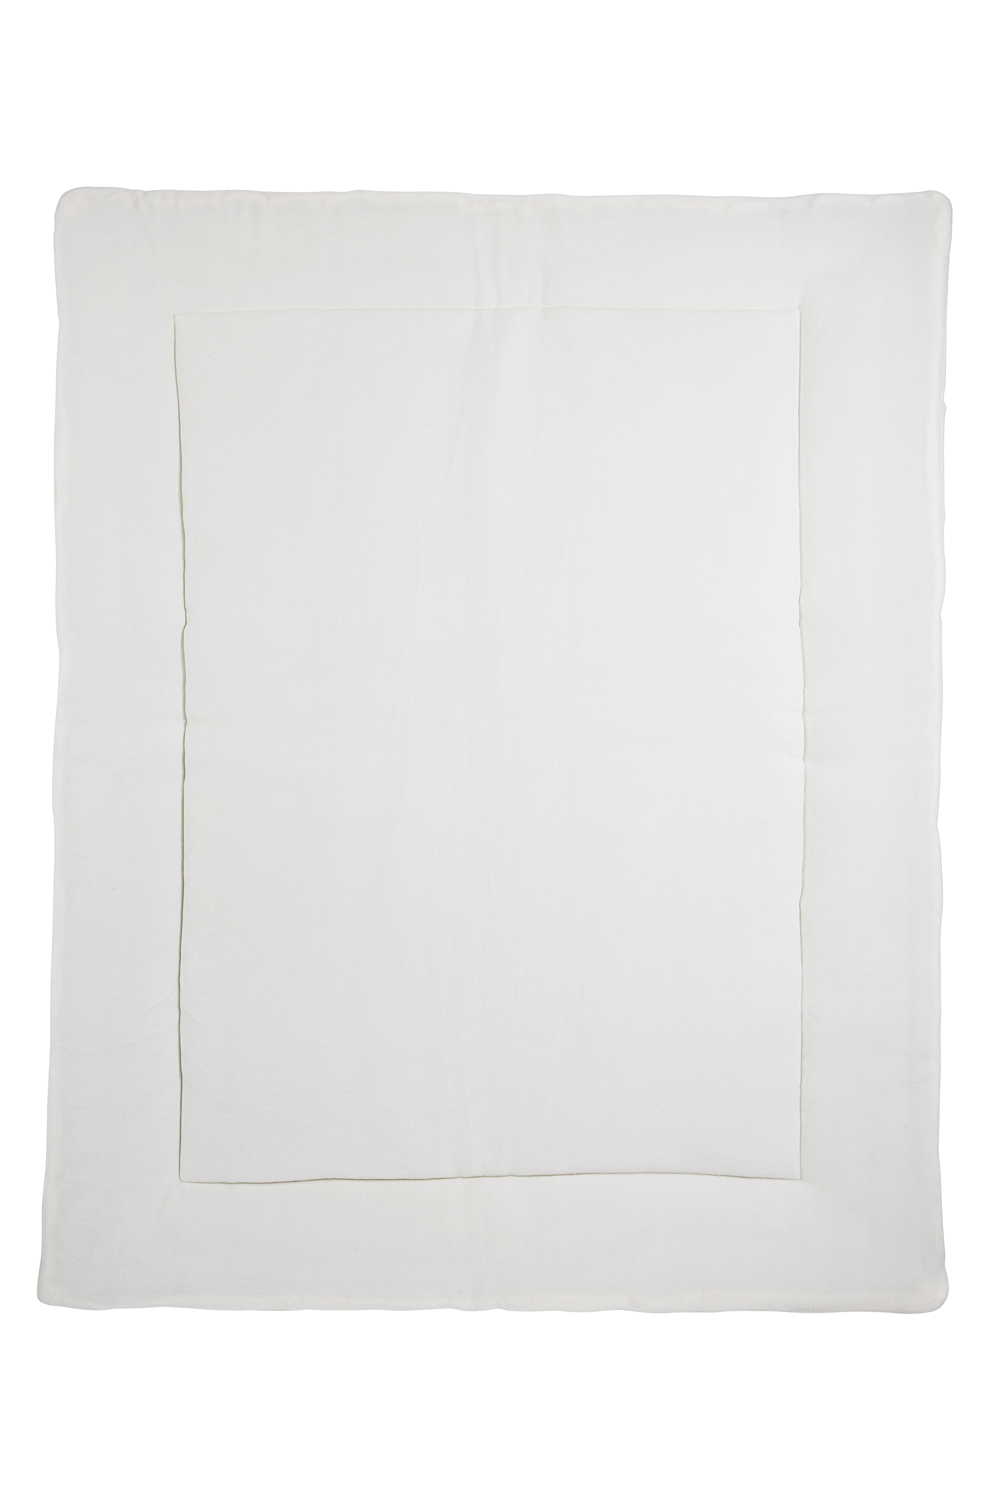 Boxkleed Knots - offwhite - 77x97cm